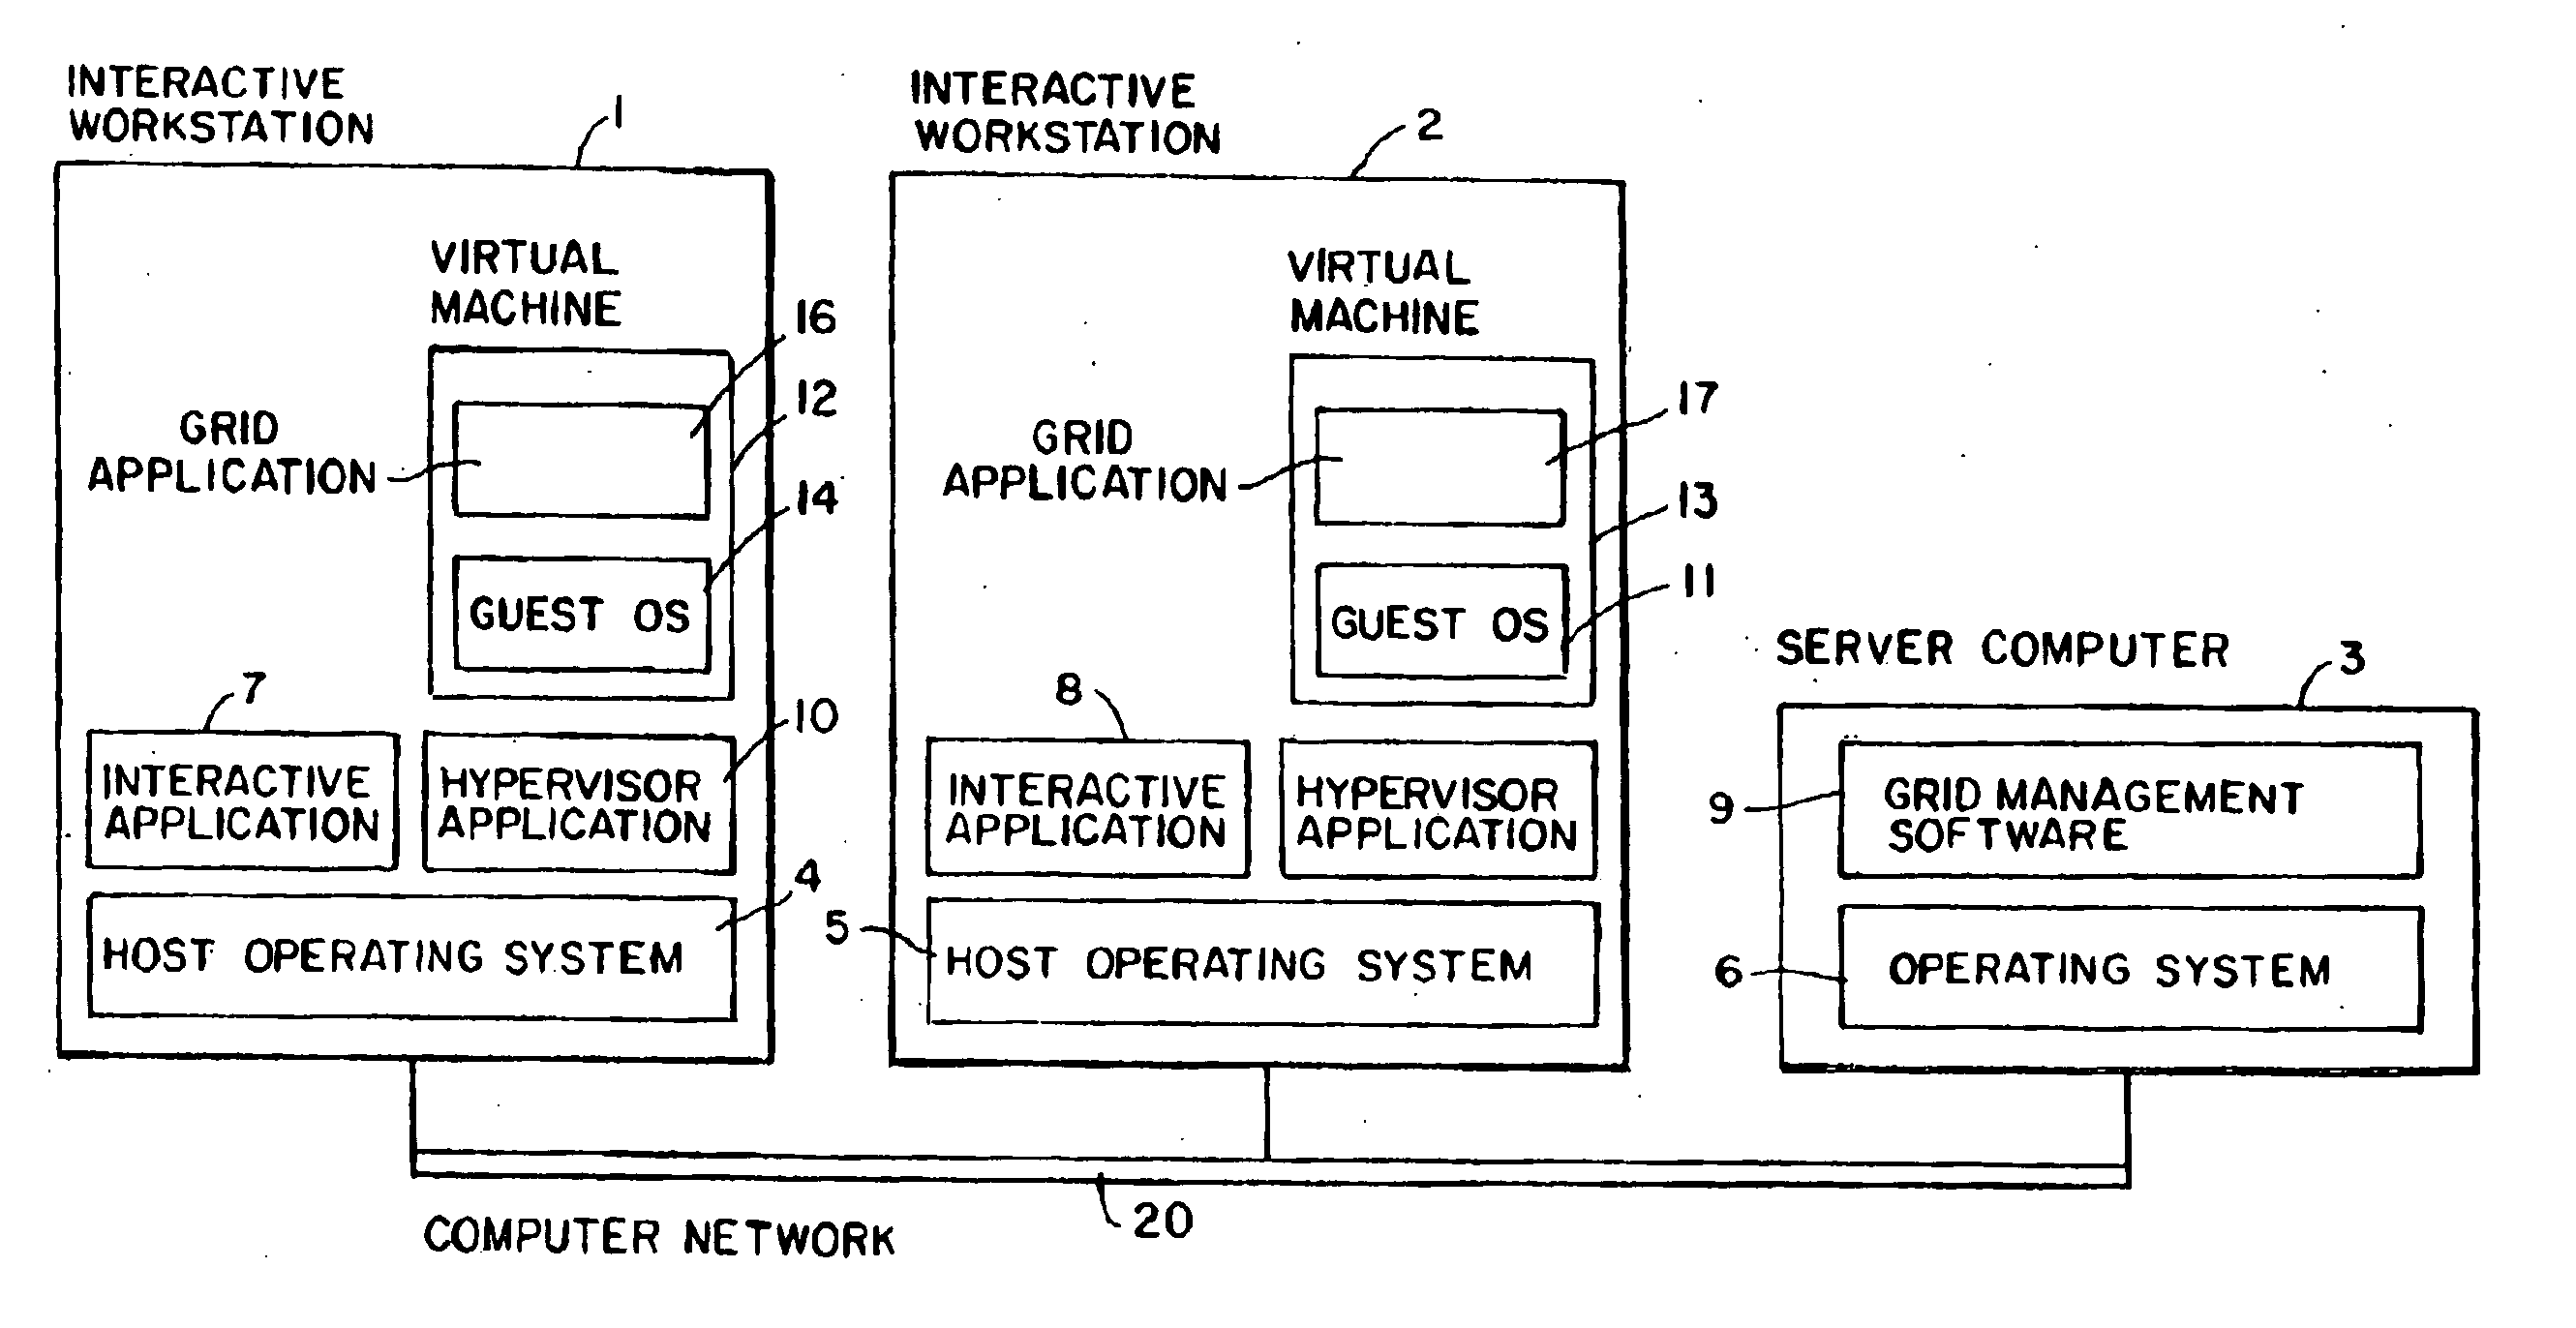 Enabling a guest virtual machine in a windows environment for policy-based participation in grid computations